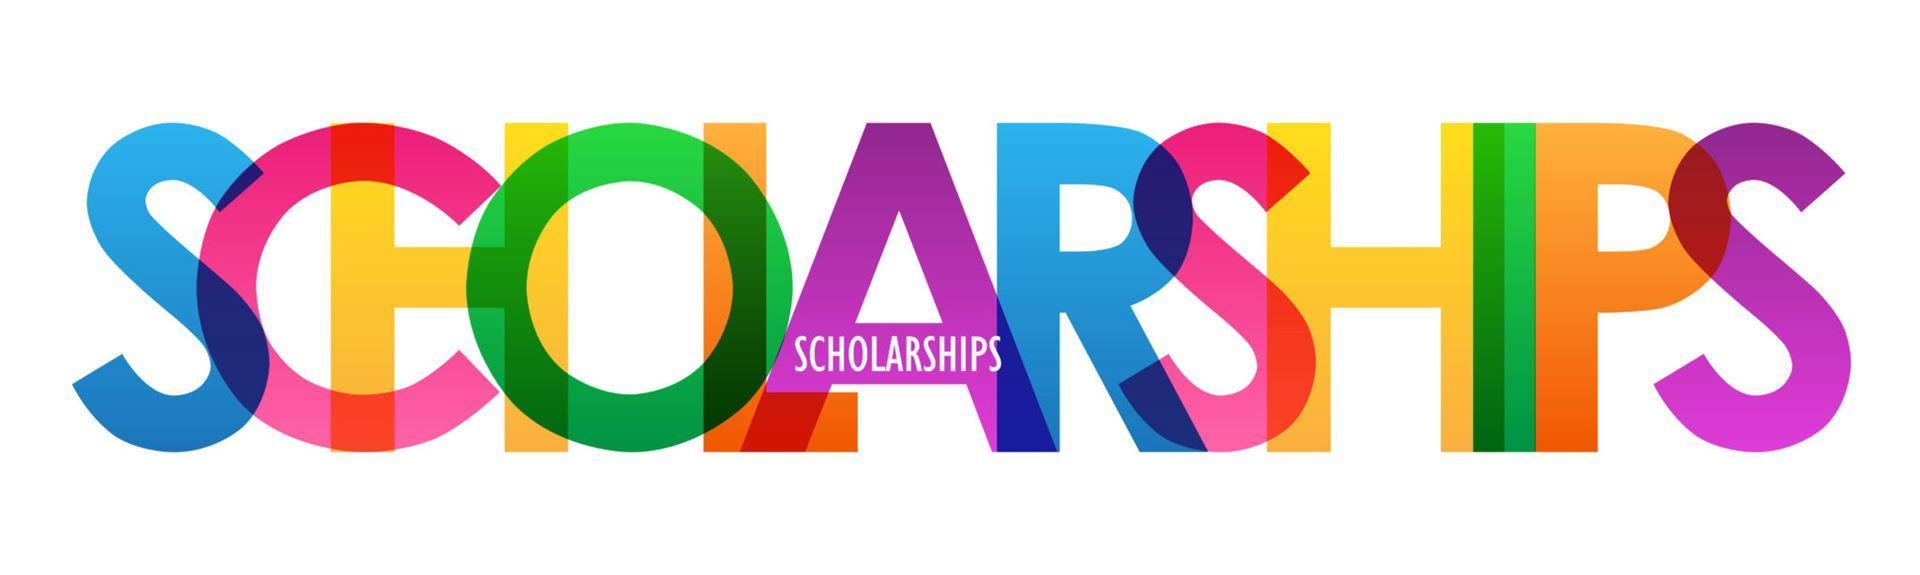  2022 SCHOLARSHIPS AVAILABLE TO TRI STAR STUDENTS: Featured Image 1 